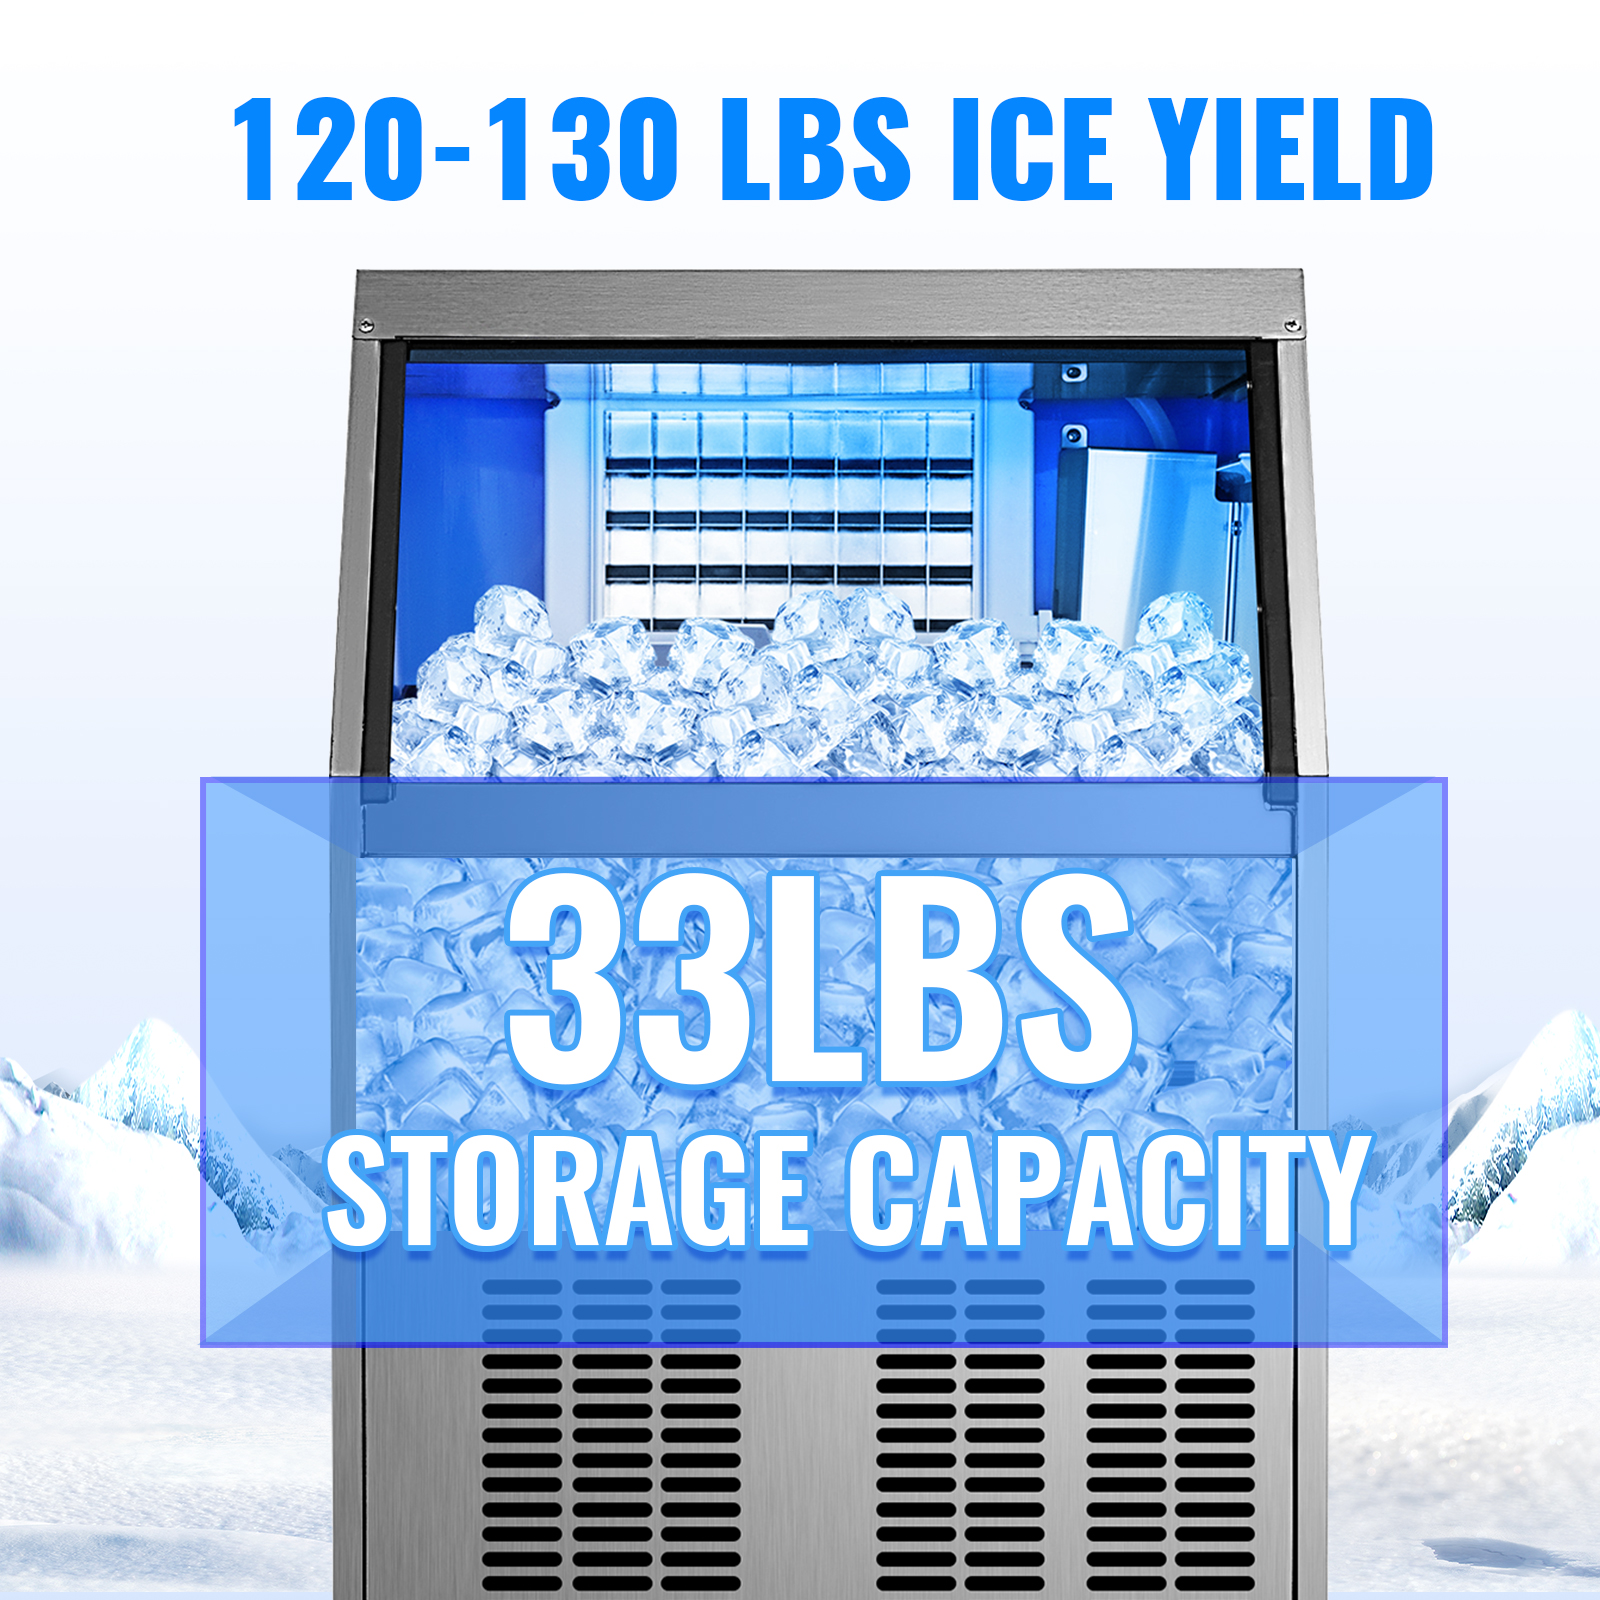 VEVOR 110V Commercial Ice Maker 80-90LBS/24H with 33LBS Bin, Full Heavy  Duty Stainless Steel Construction, Automatic Operation, Clear Cube for Home  Bar, Include Water Filter, Scoop, Connection Hose